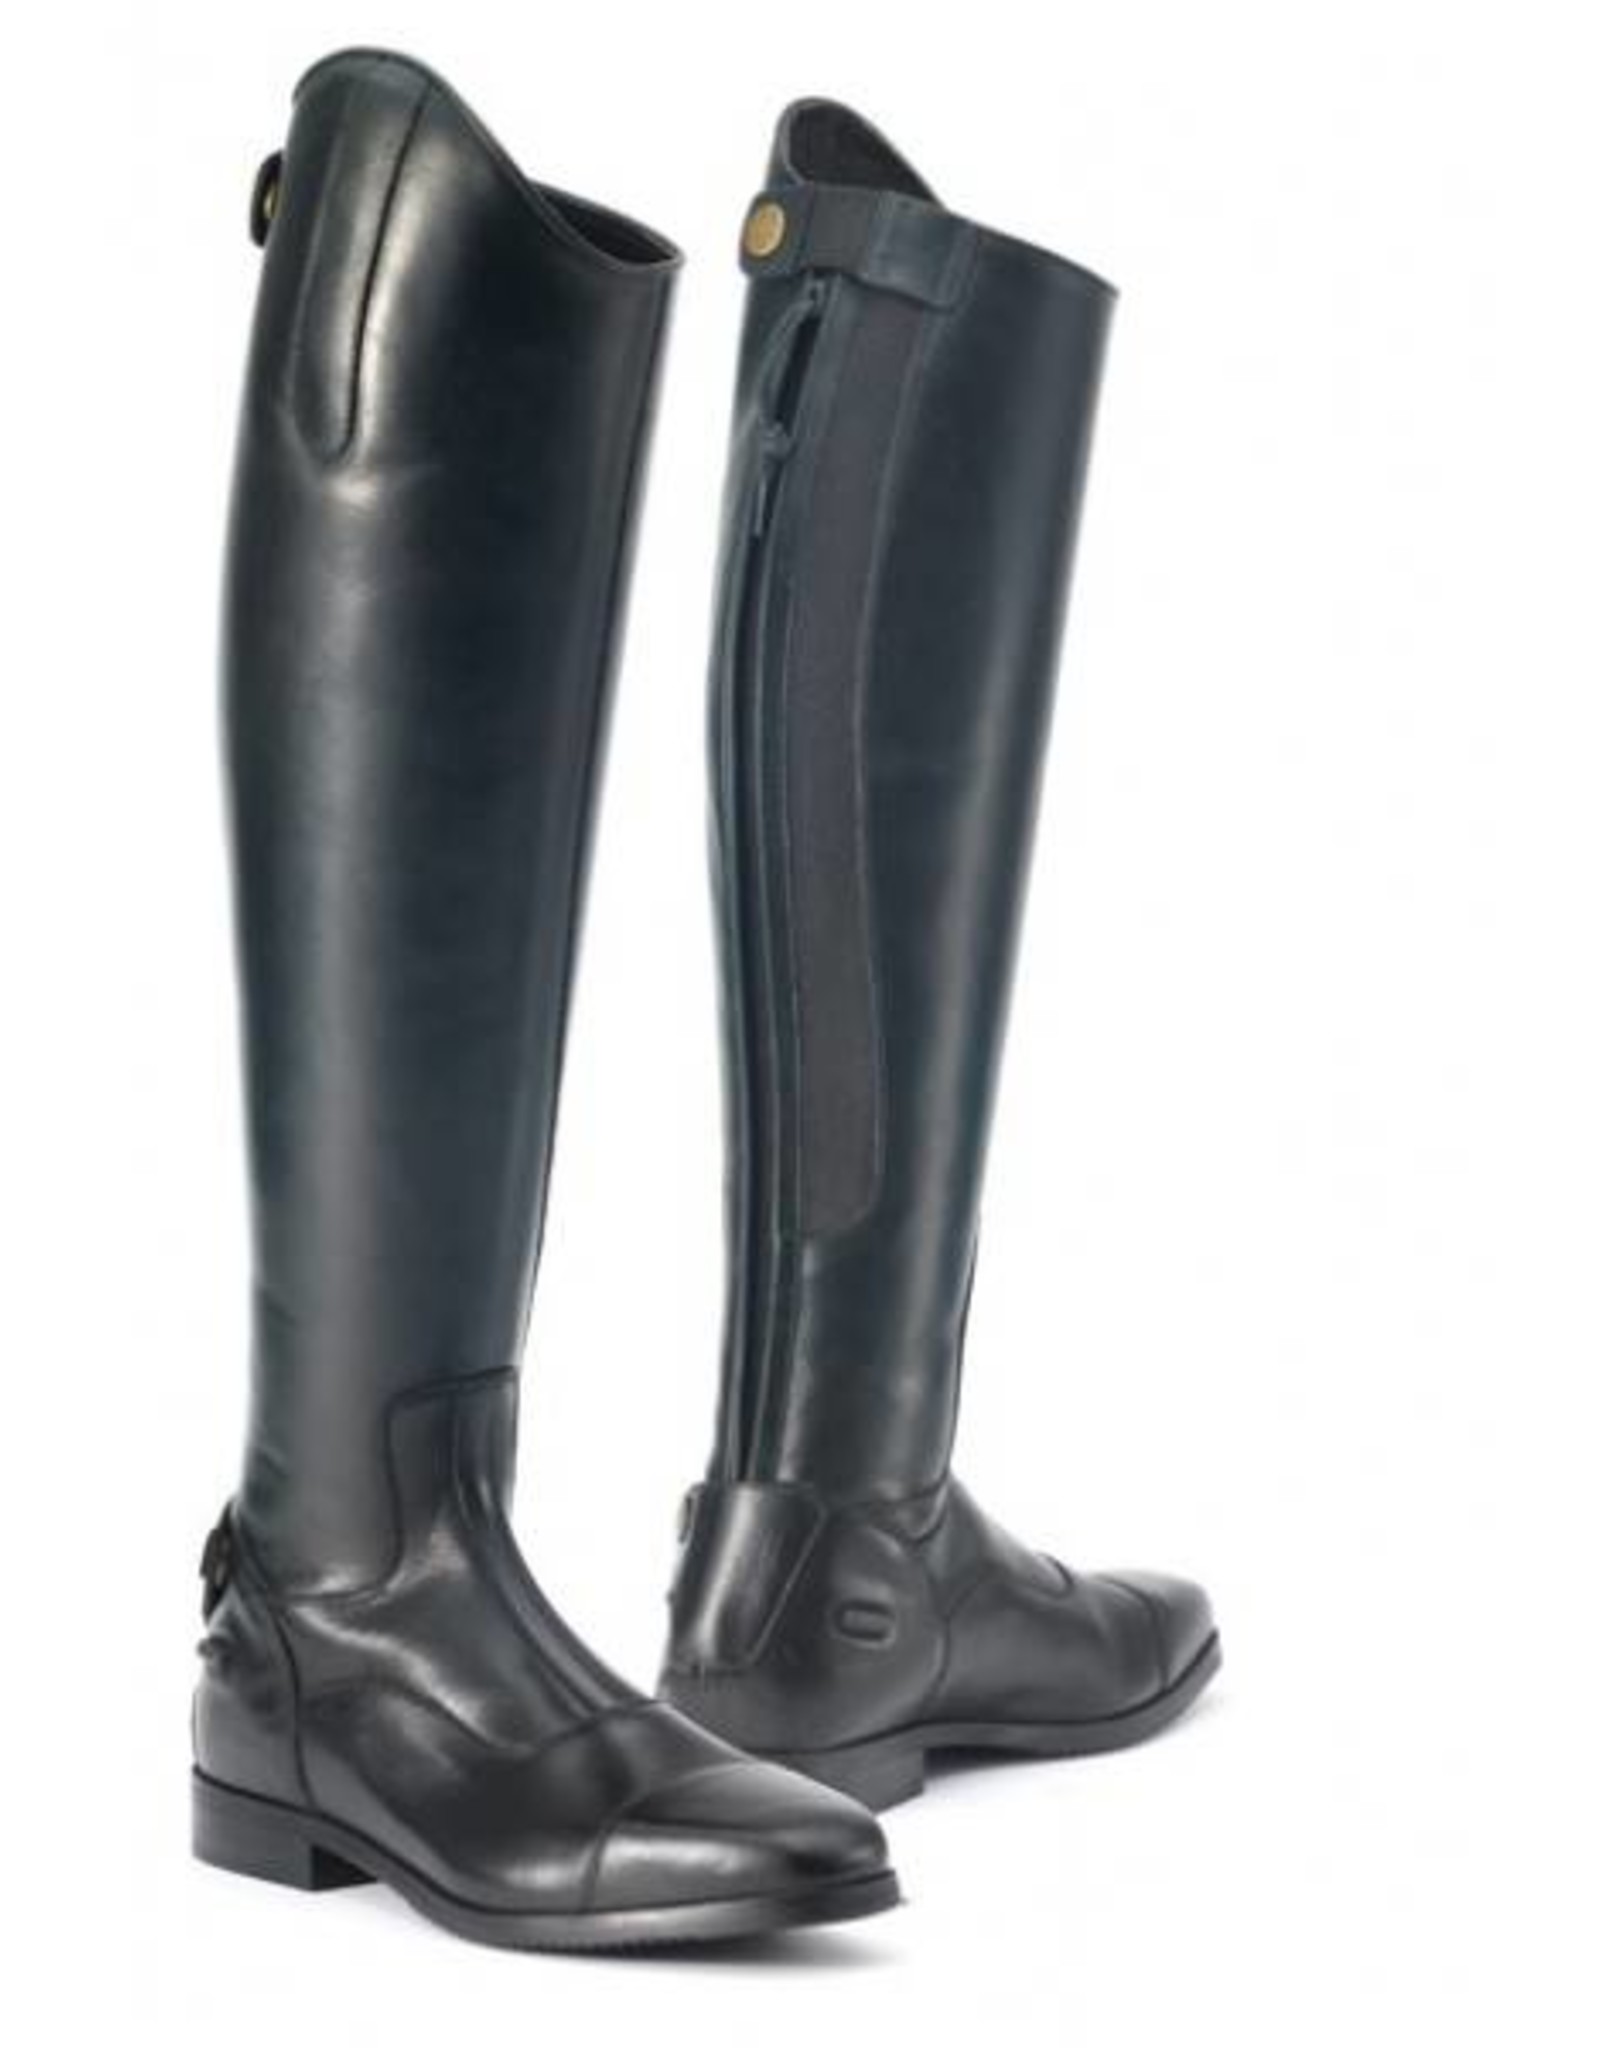 Ovation Olympia Tall Show Boot